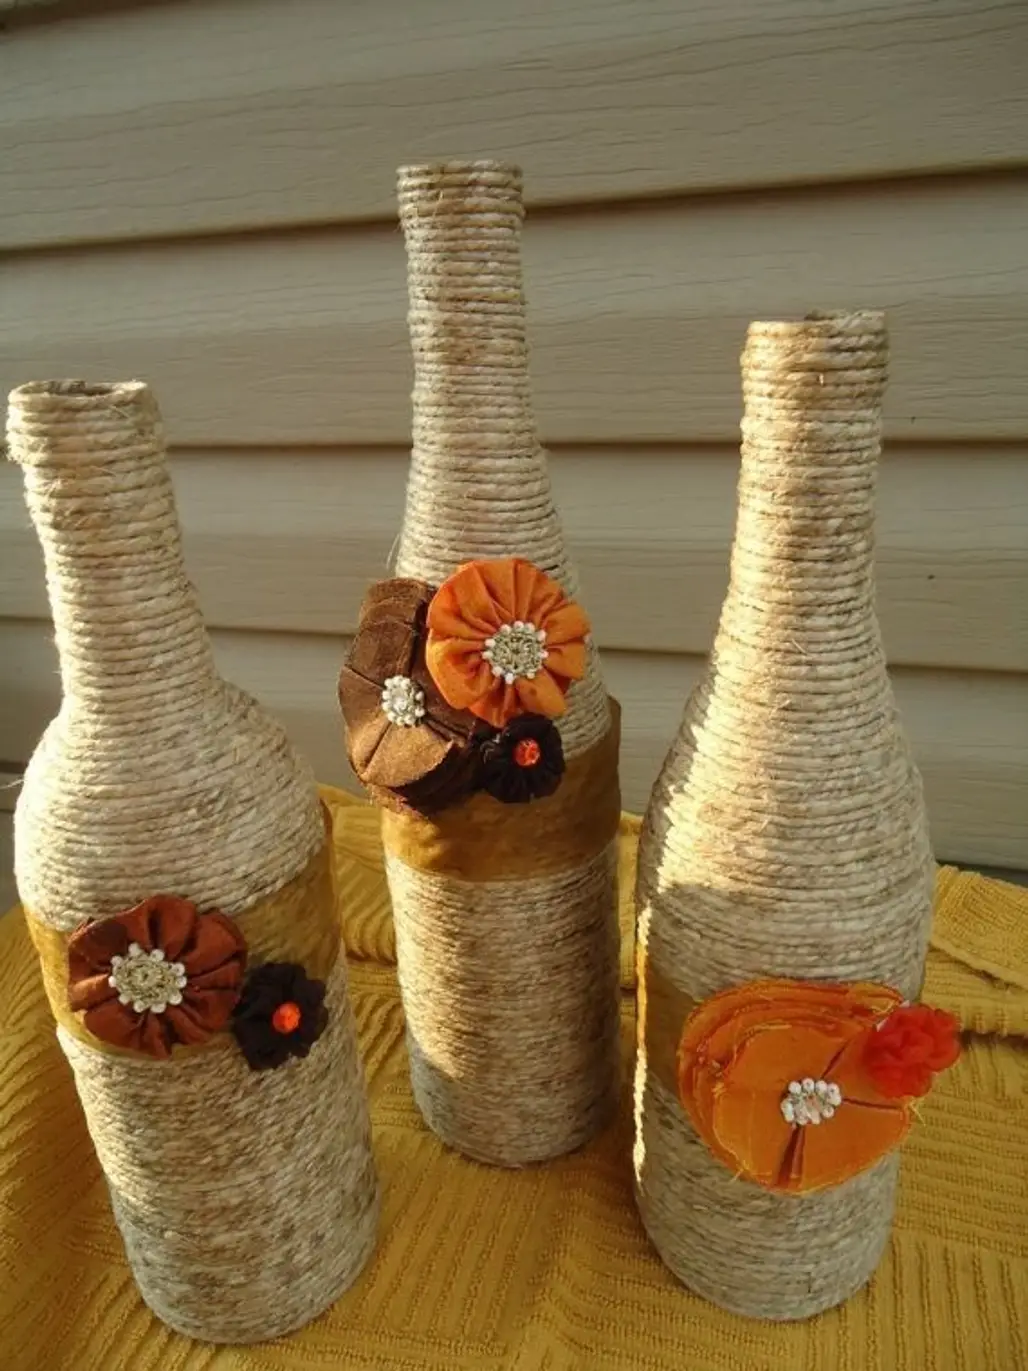 DIY Decorative Wine Bottles Wrapped with Twine and Fabric Flowers